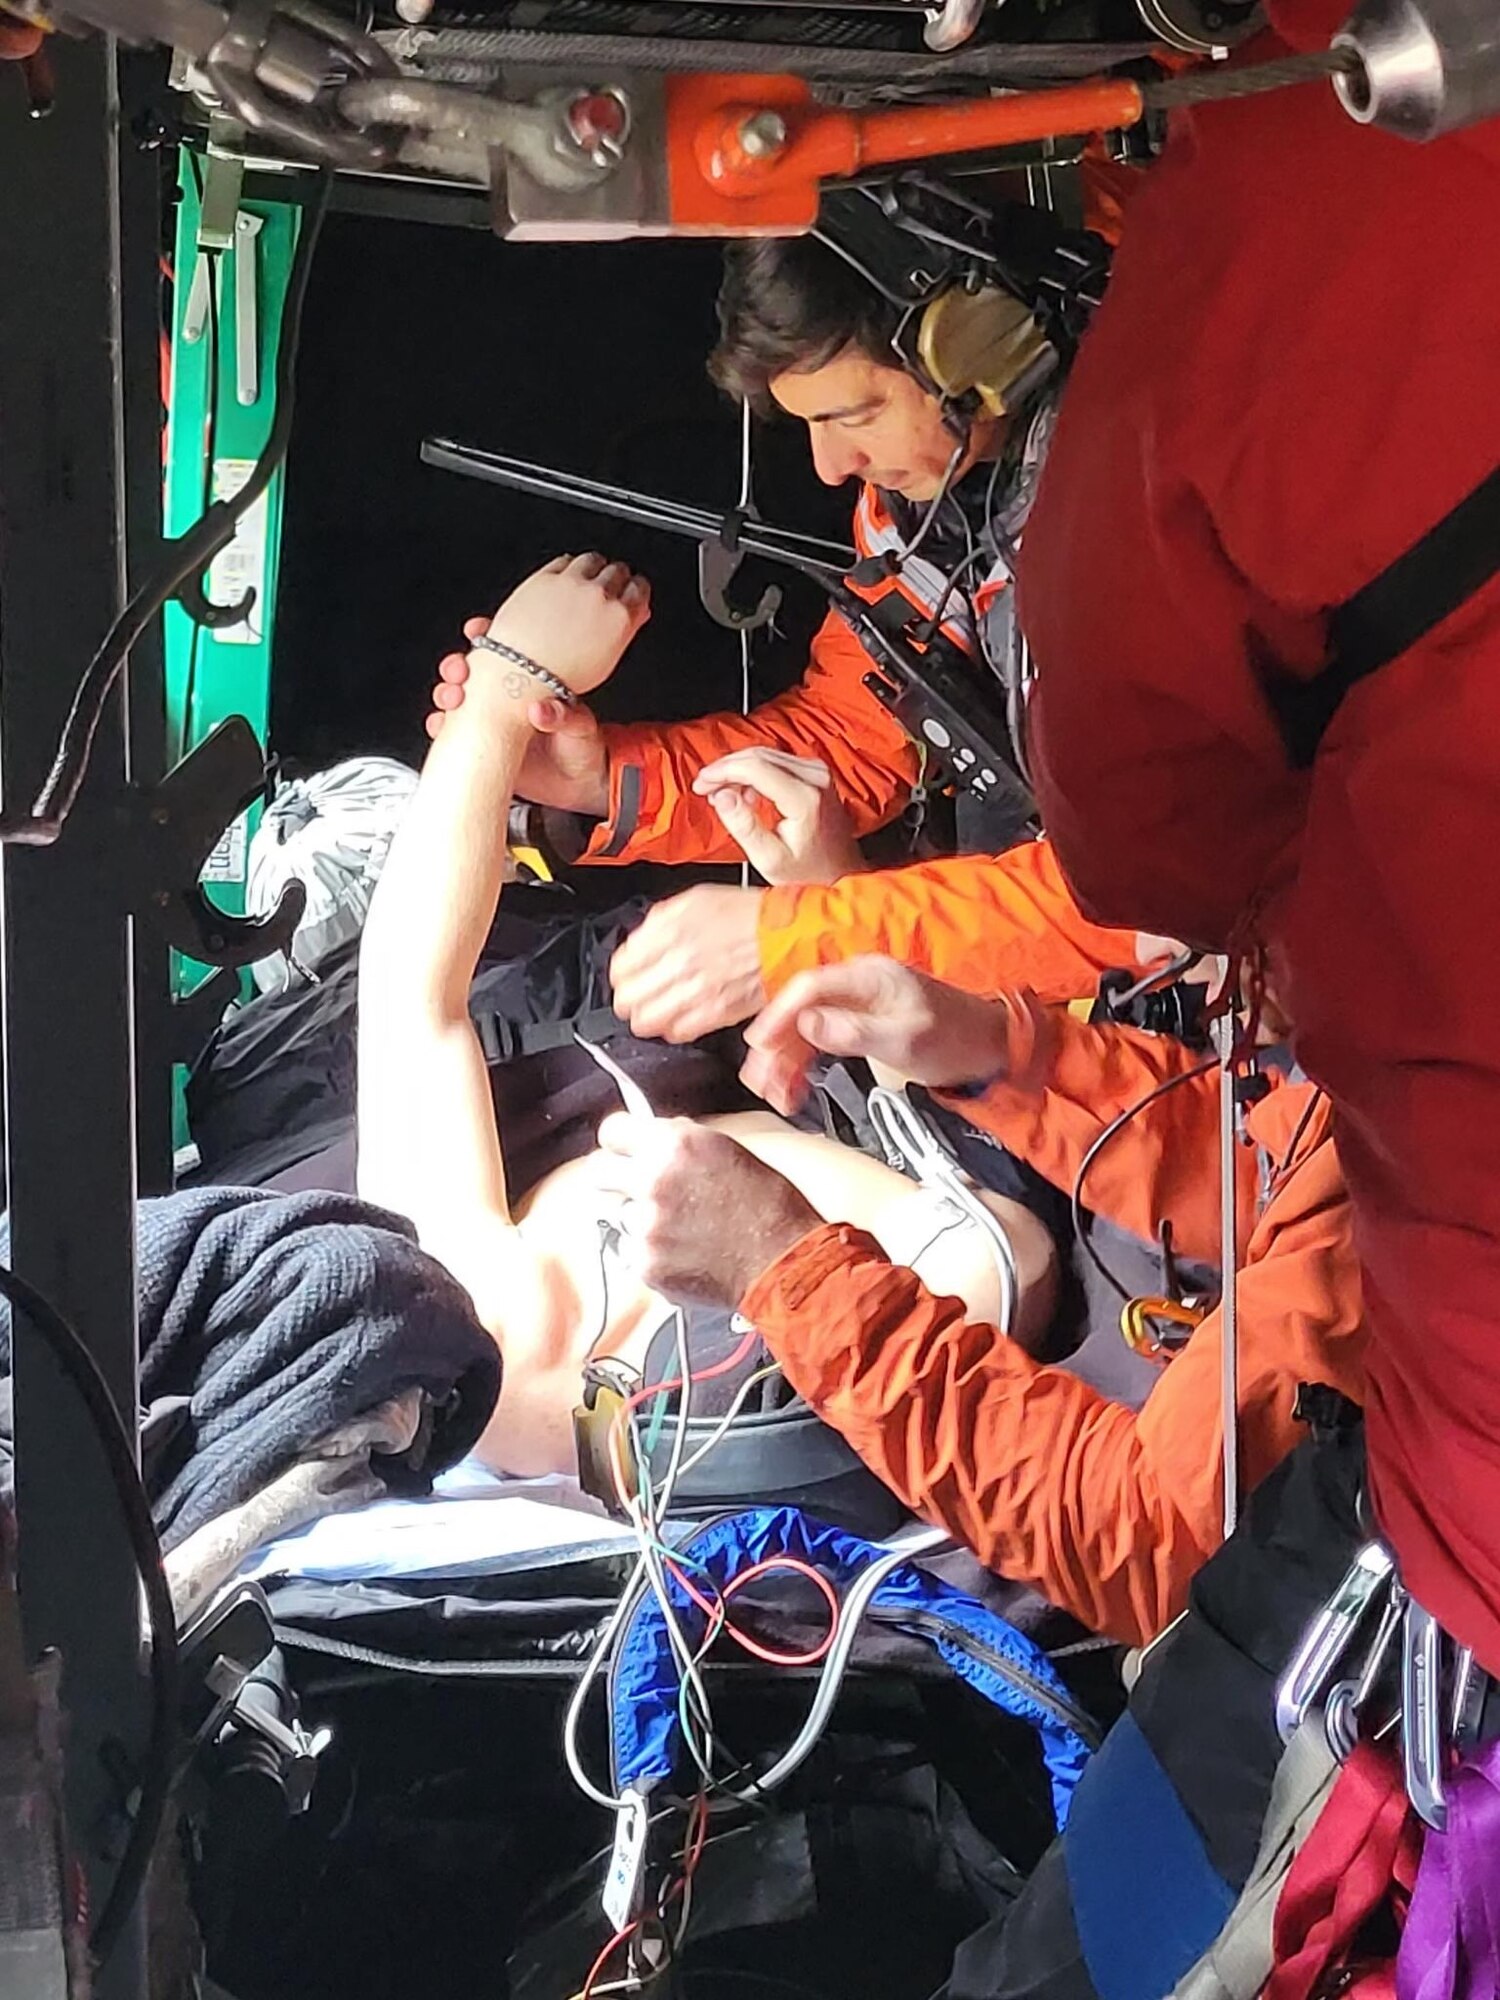 304th Rescue Squadron pararescuemen provide medical assistance to a recovered climber May 13, 2022 on Mount Rainier, Washington. The 304th RQS  assisted in saving two stranded climbers from the mountain. (Courtesy photo)